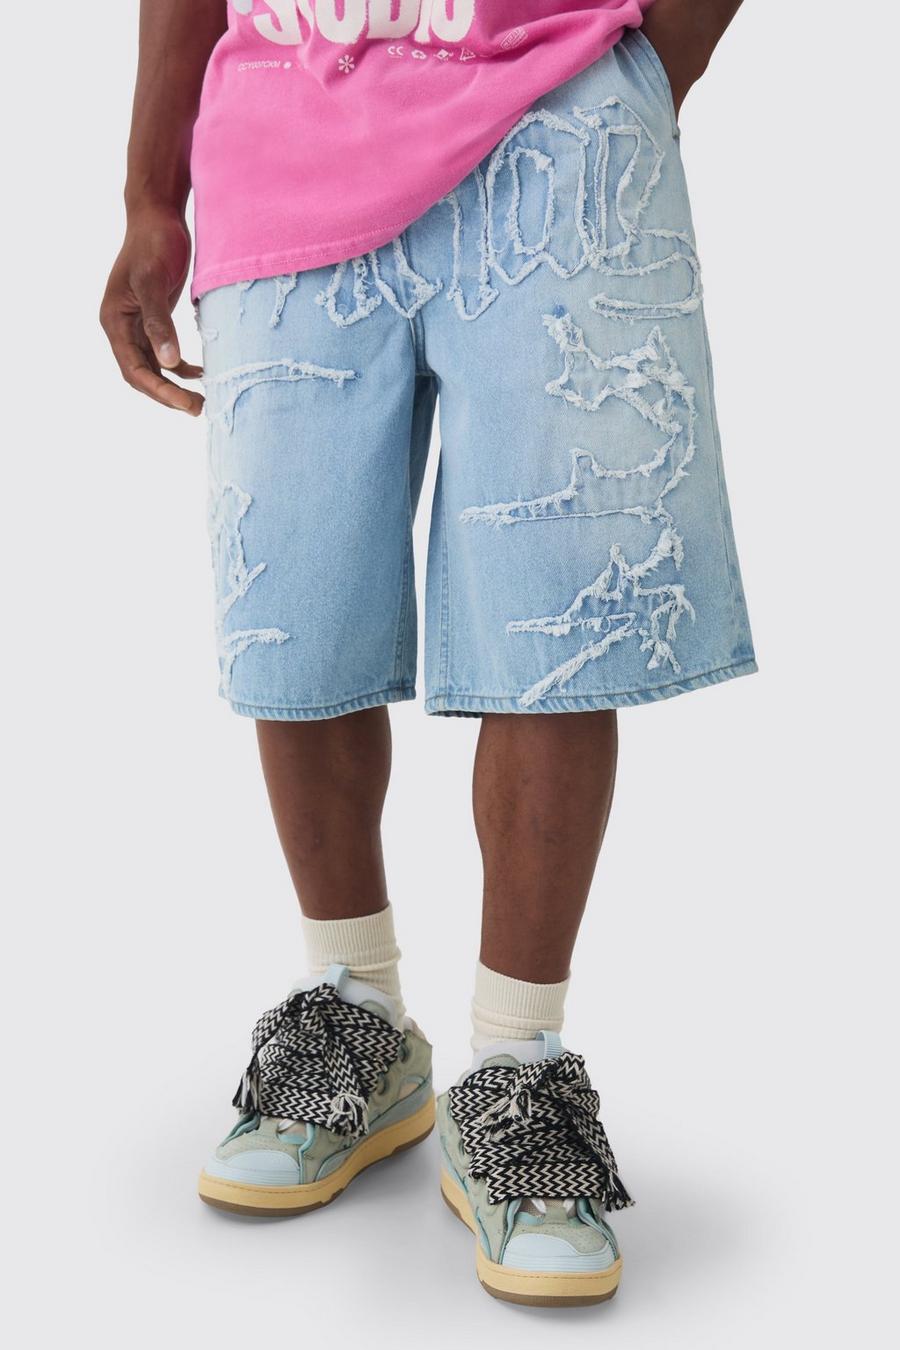 Official Self Fabric Applique Denim Jorts In Ice Blue